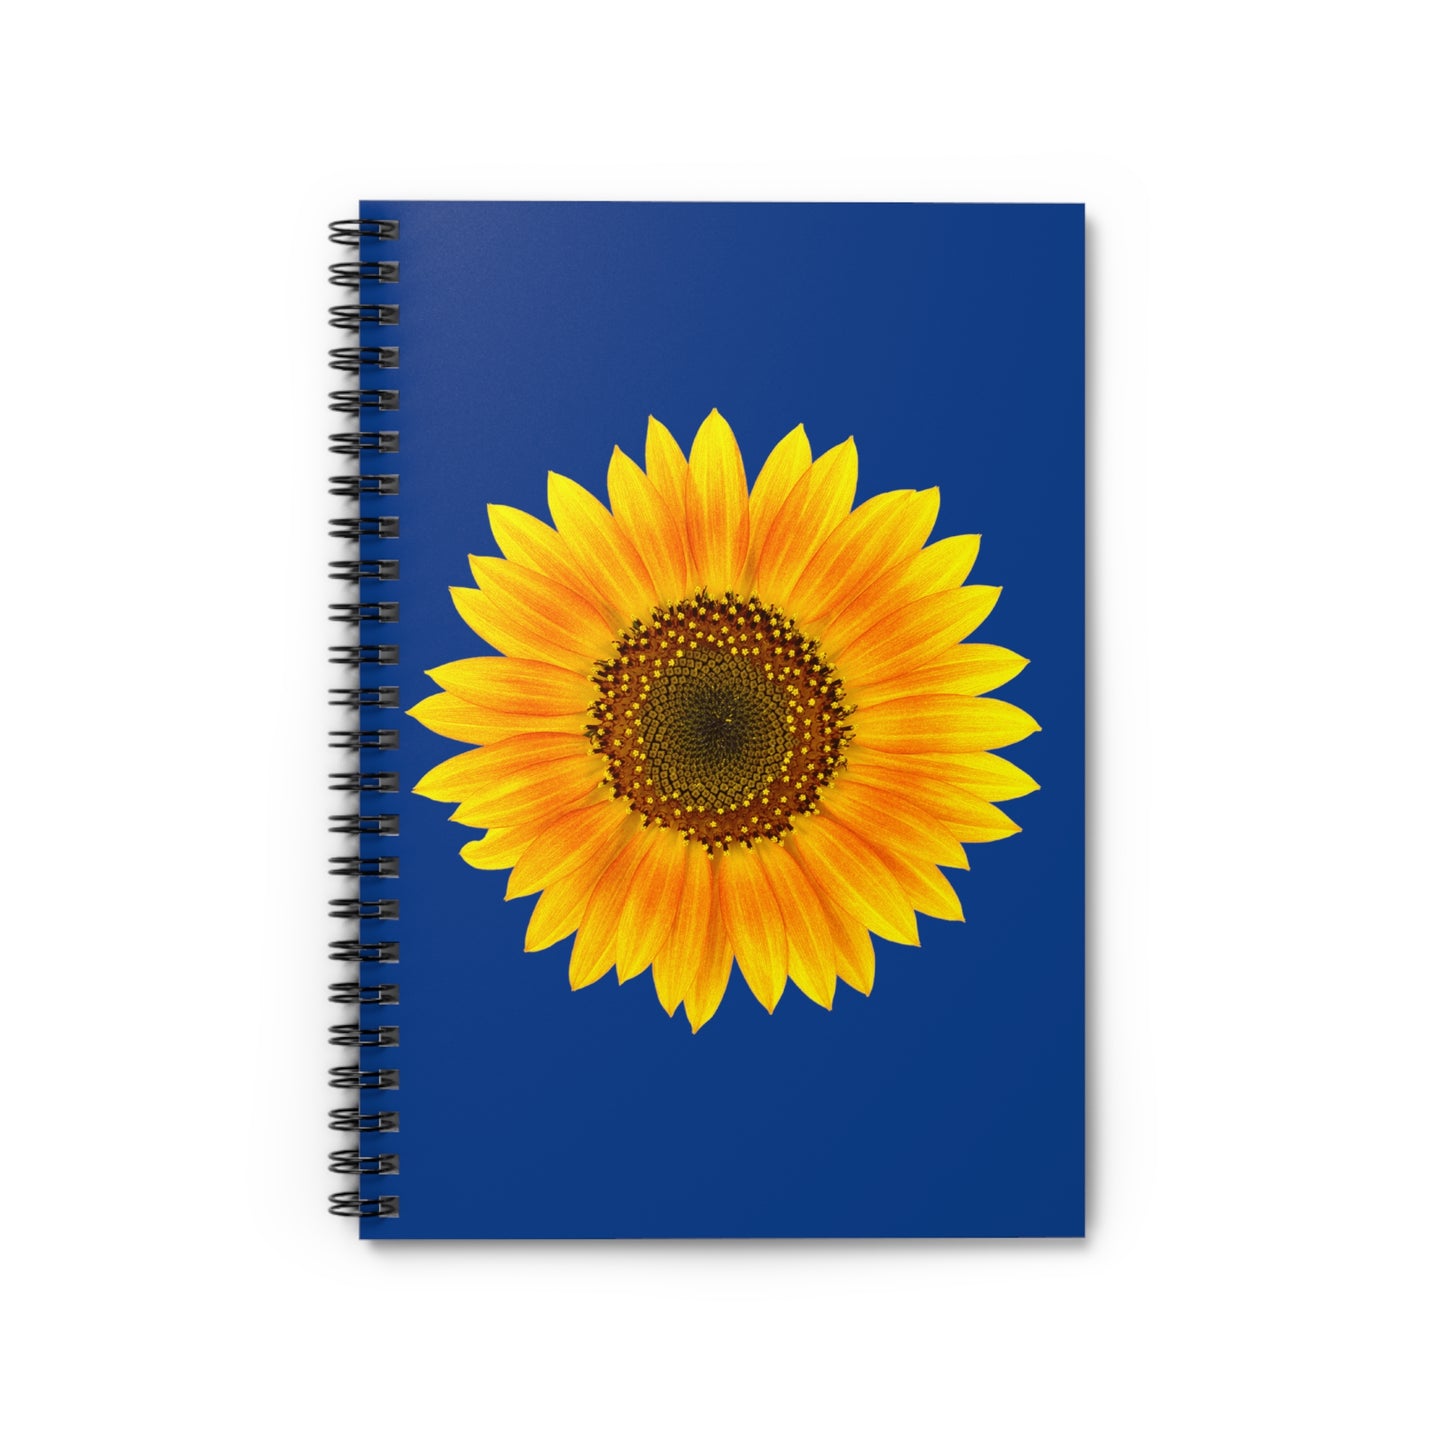 Flat front view of the notebook